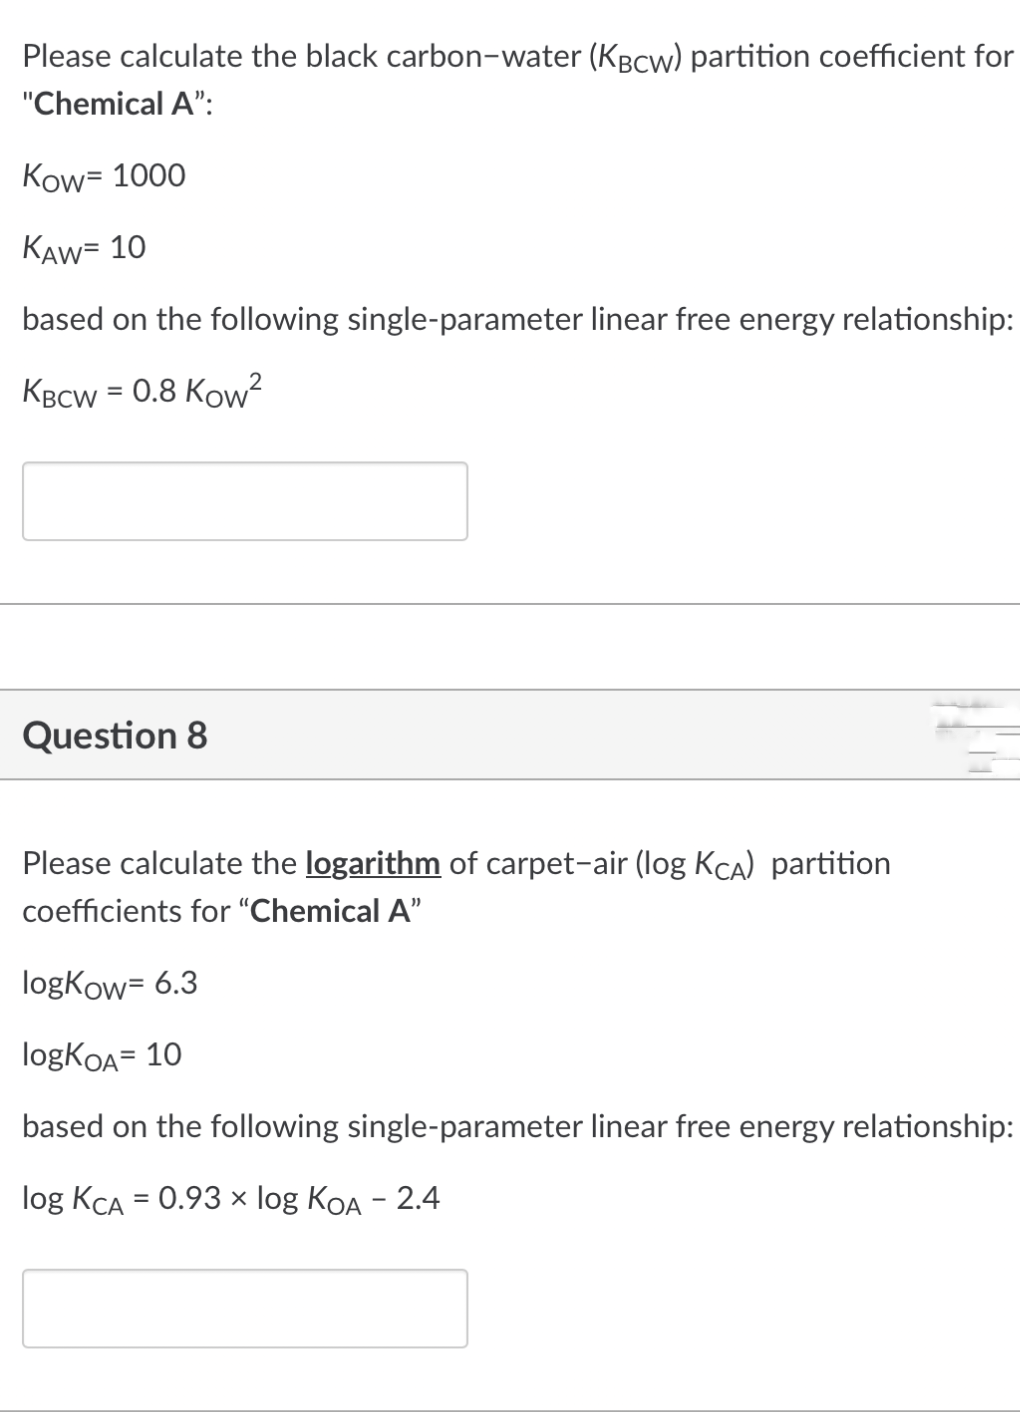 Please calculate the black carbon-water (KBCw) partition coefficient for
"Chemical A":
Kow= 1000
KAW= 10
based on the following single-parameter linear free energy relationship:
KBCW = 0.8 Kow²
Question 8
Please calculate the logarithm of carpet-air (log KCA) partition
coefficients for "Chemical A"
logKow= 6.3
logKOA= 10
based on the following single-parameter linear free energy relationship:
log KCA = 0.93 × log KOA - 2.4